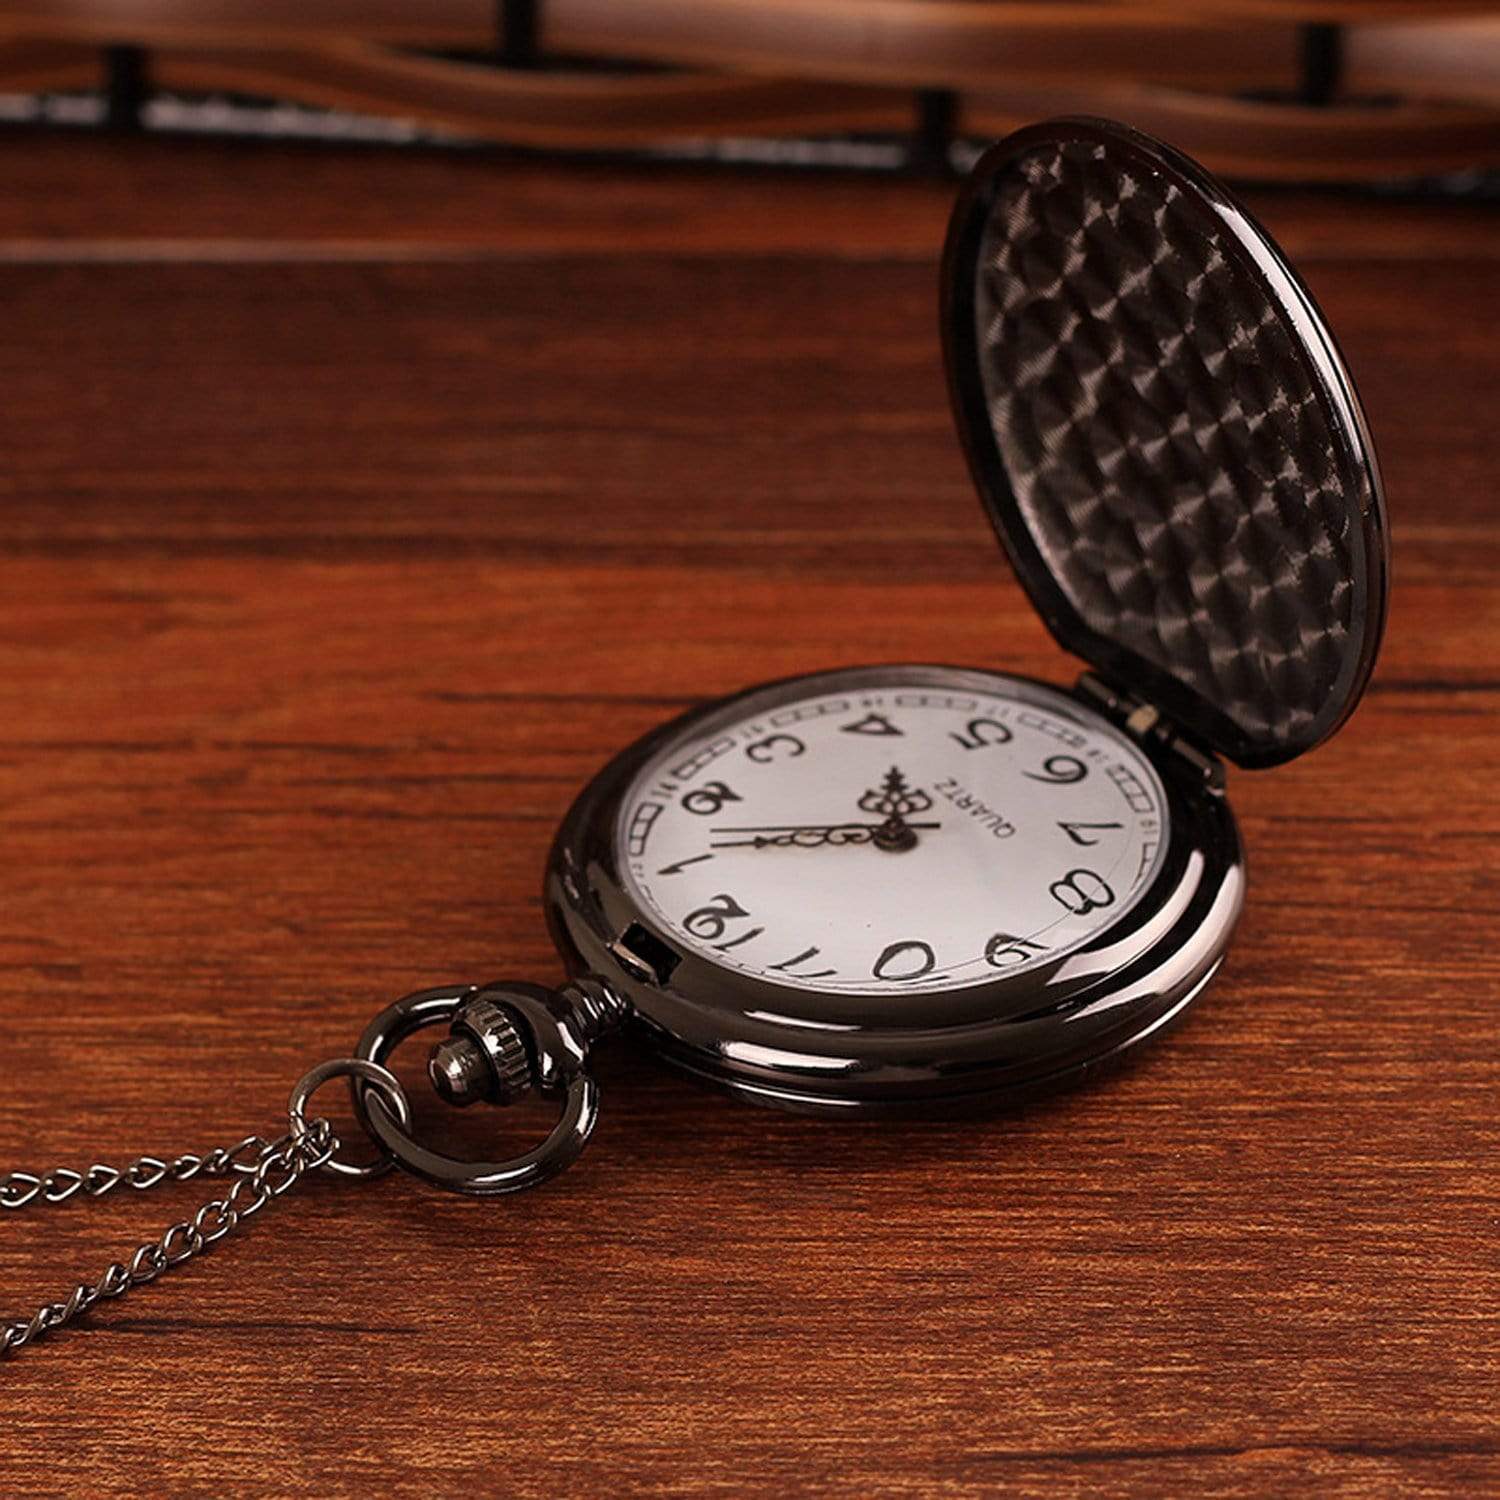 Pocket Watches Dad To Son - Full Of Love And Caring For Others Pocket Watch GiveMe-Gifts